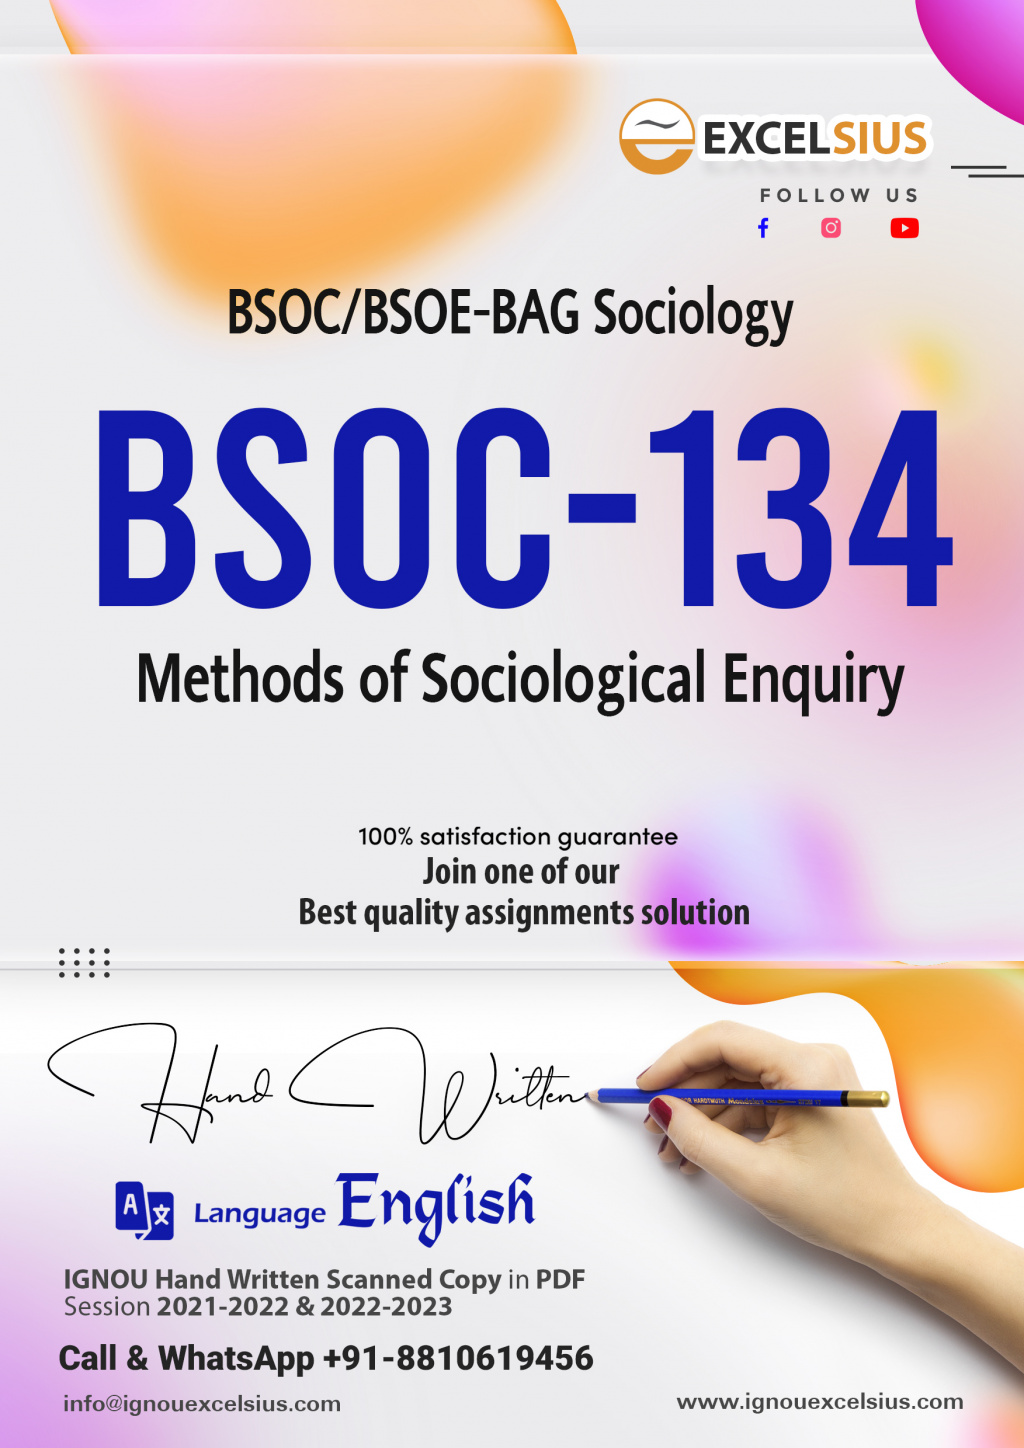 IGNOU BSOC-134 - Methods of Sociological Enquiry, Latest Solved Assignment-July 2022 – January 2023